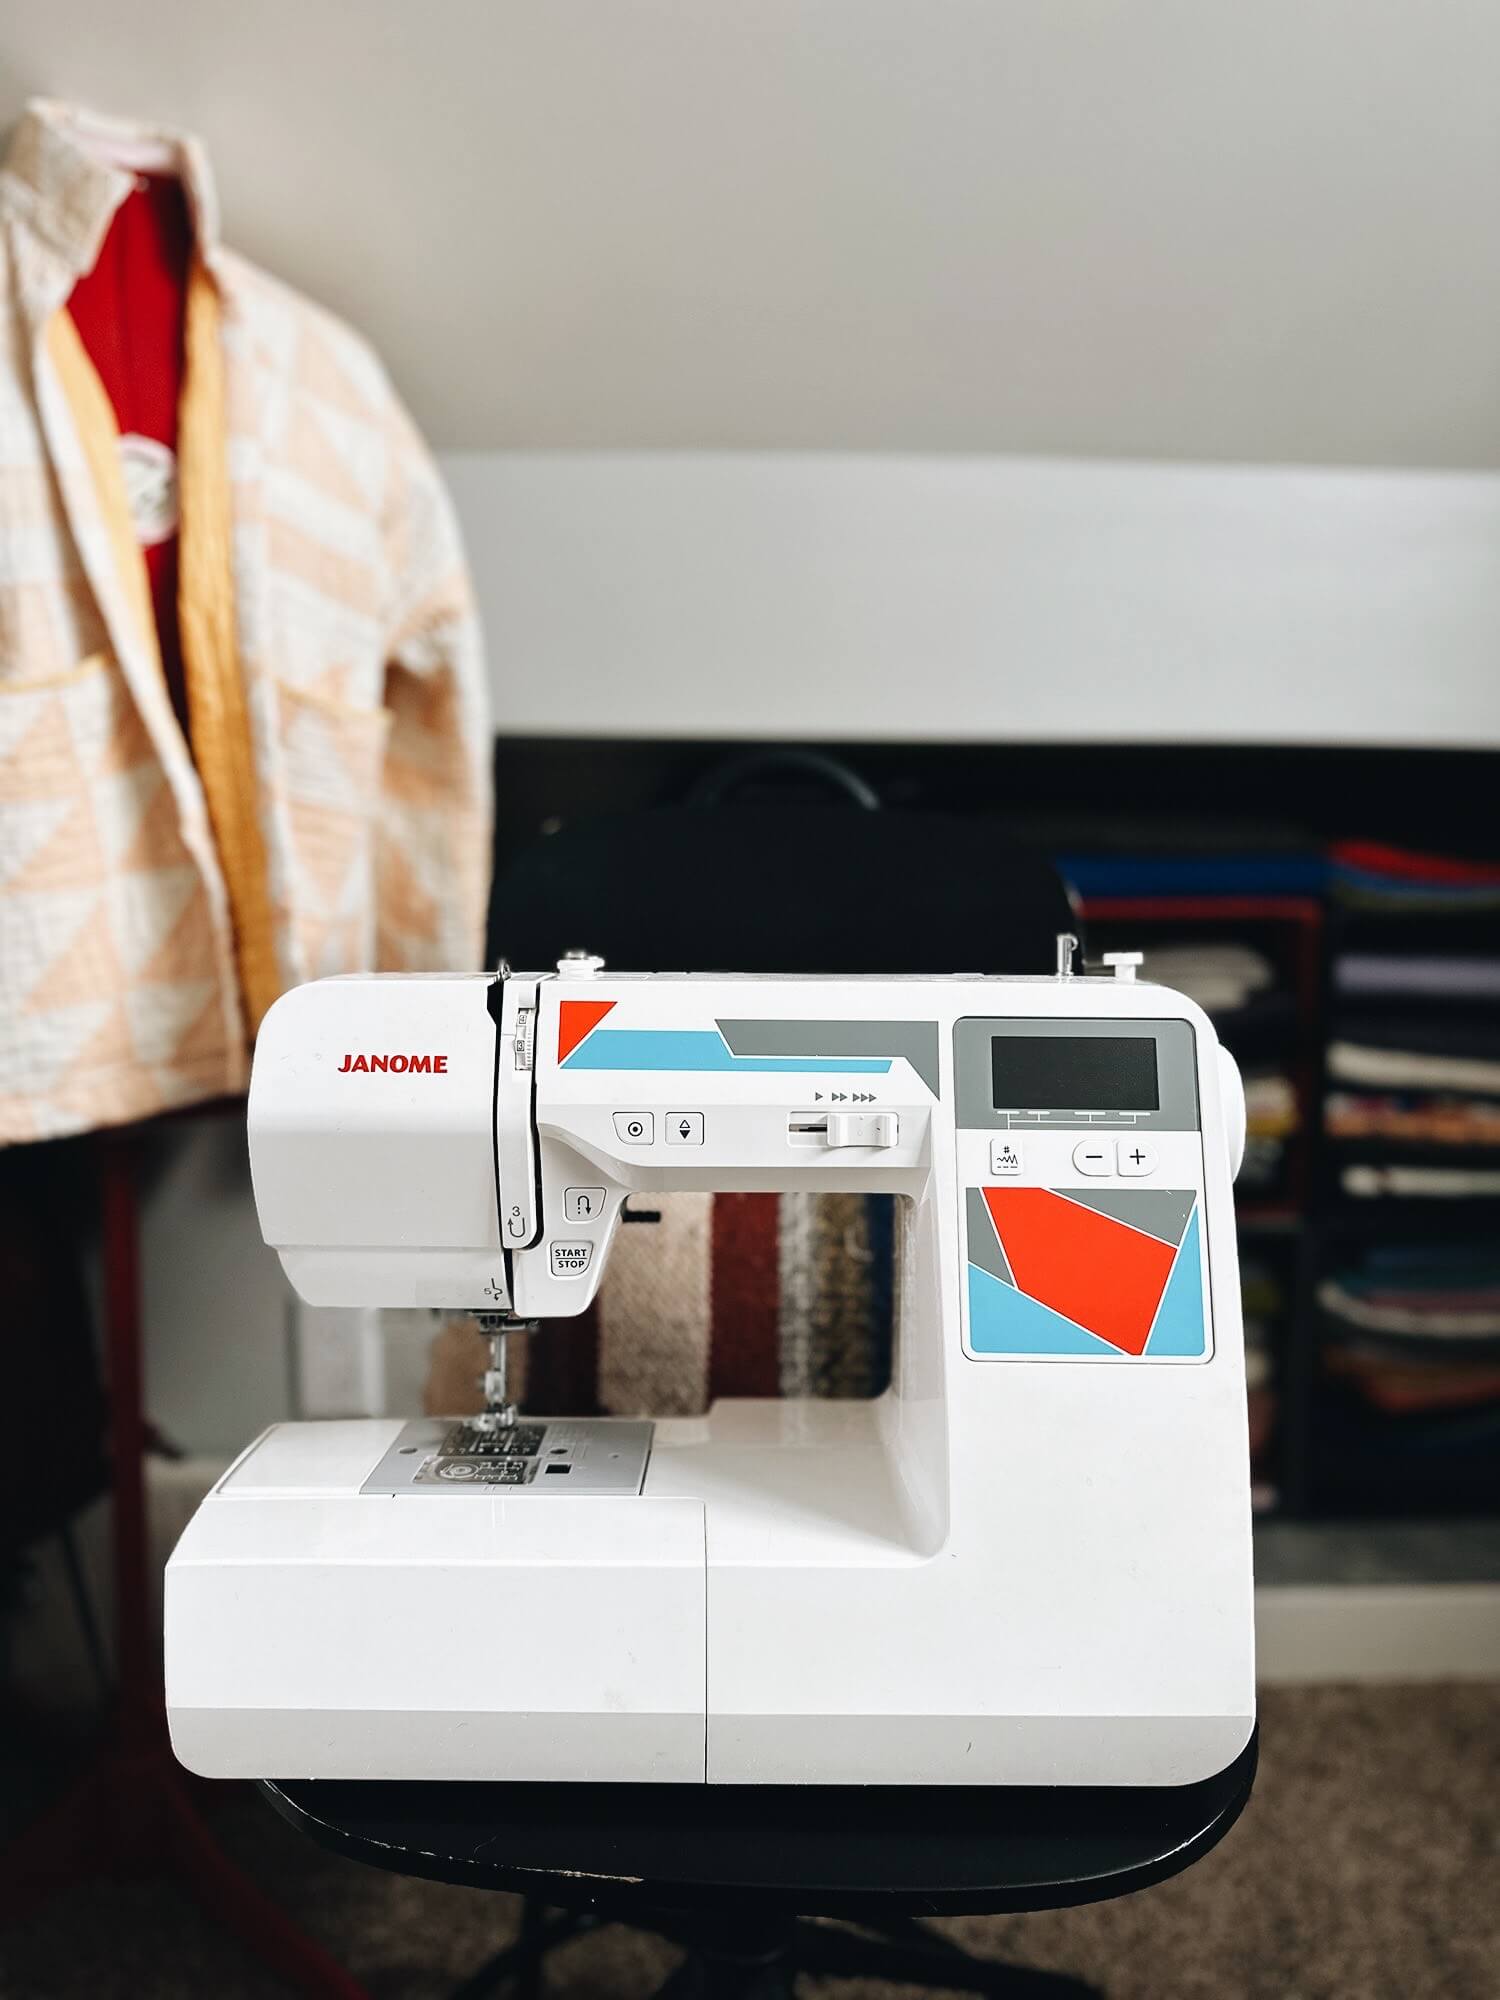  Customer reviews: Brother Sewing and Quilting Machine